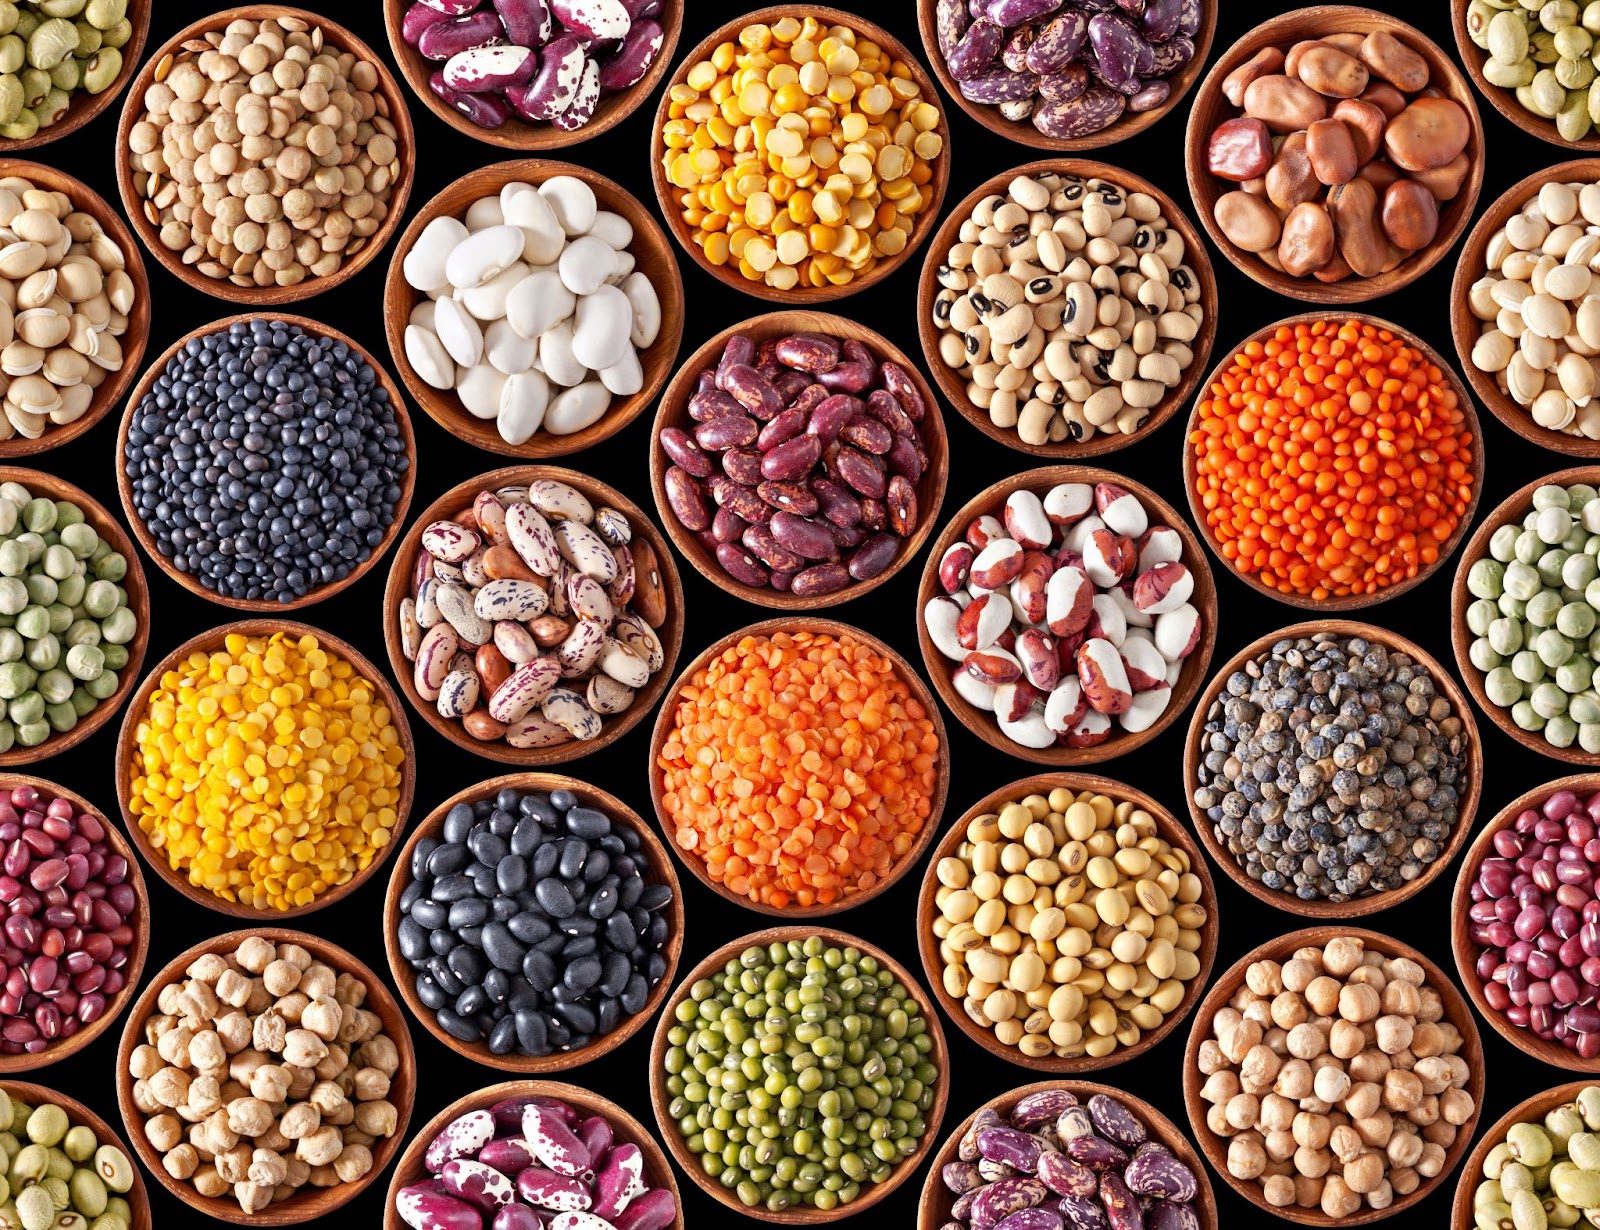 Overhead shot image of several different kinds of beans and lentils